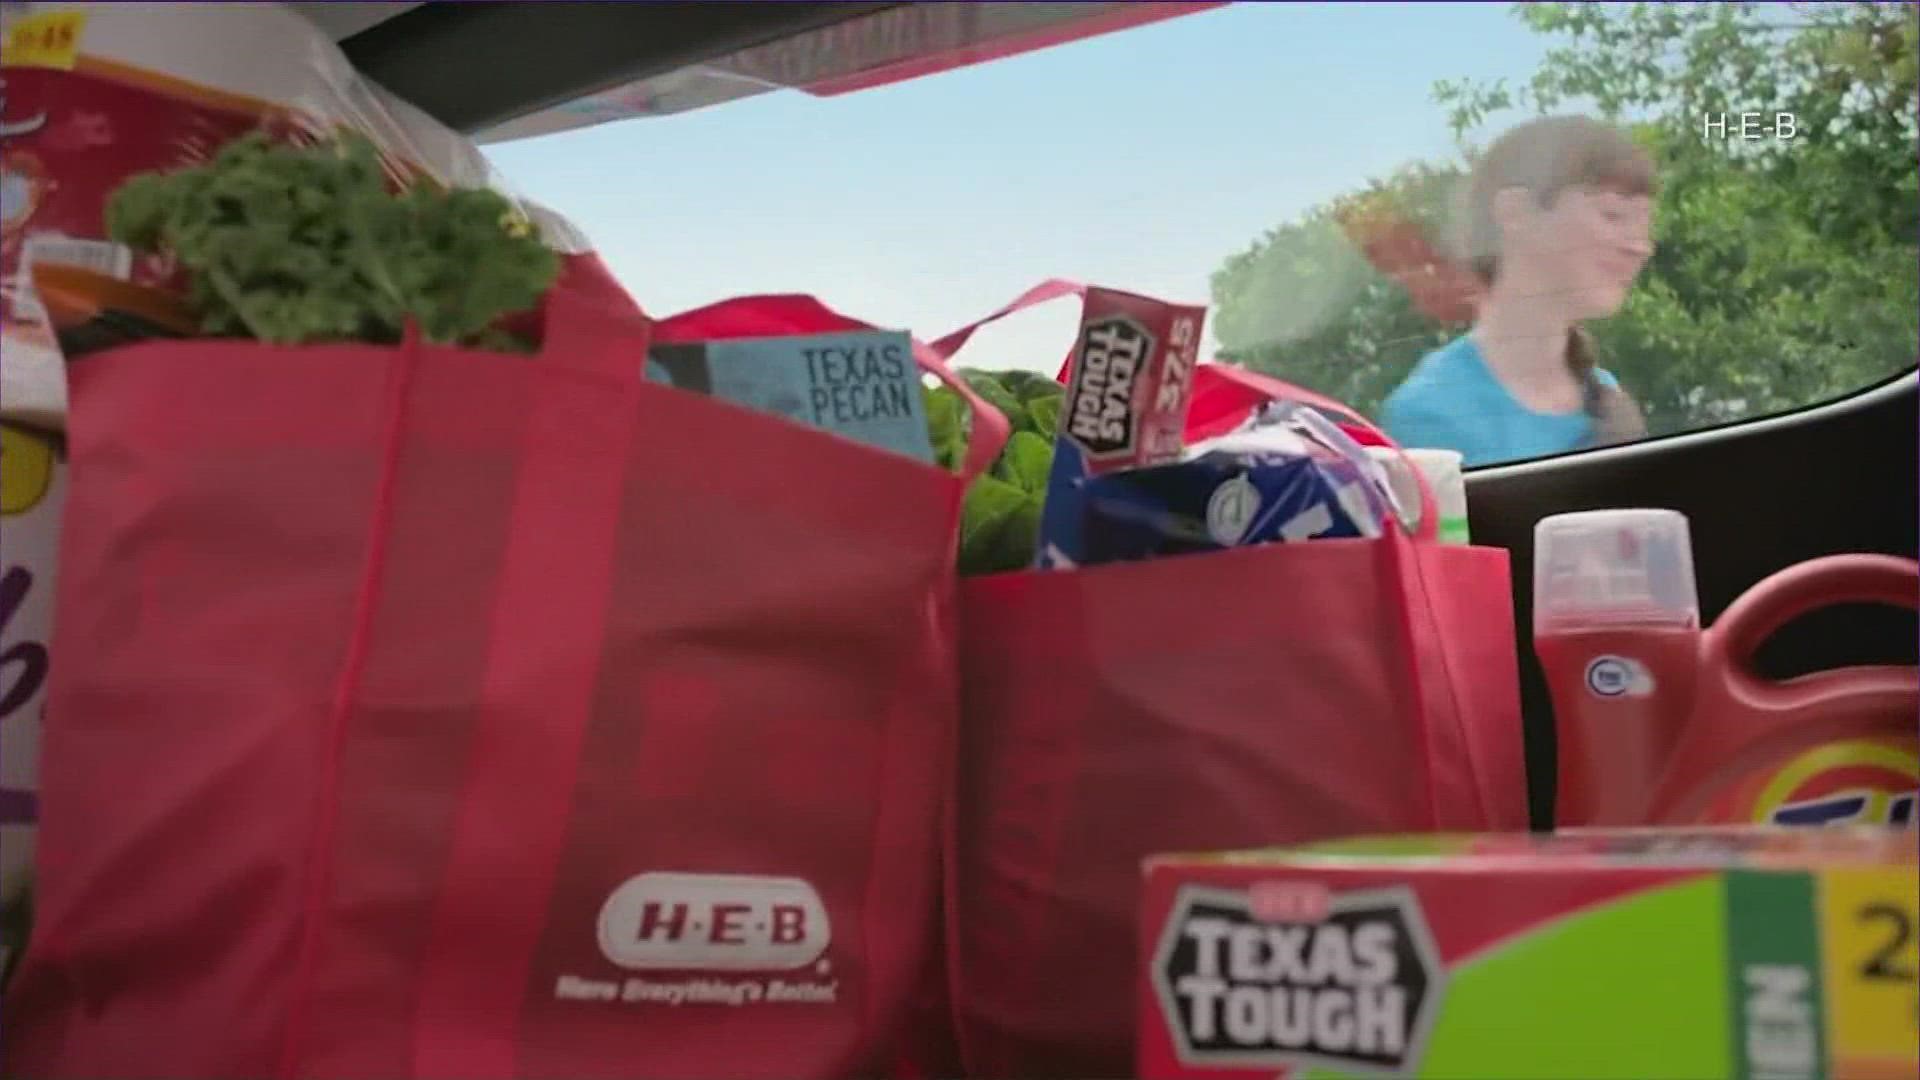 H-E-B is now delivering to UT students.